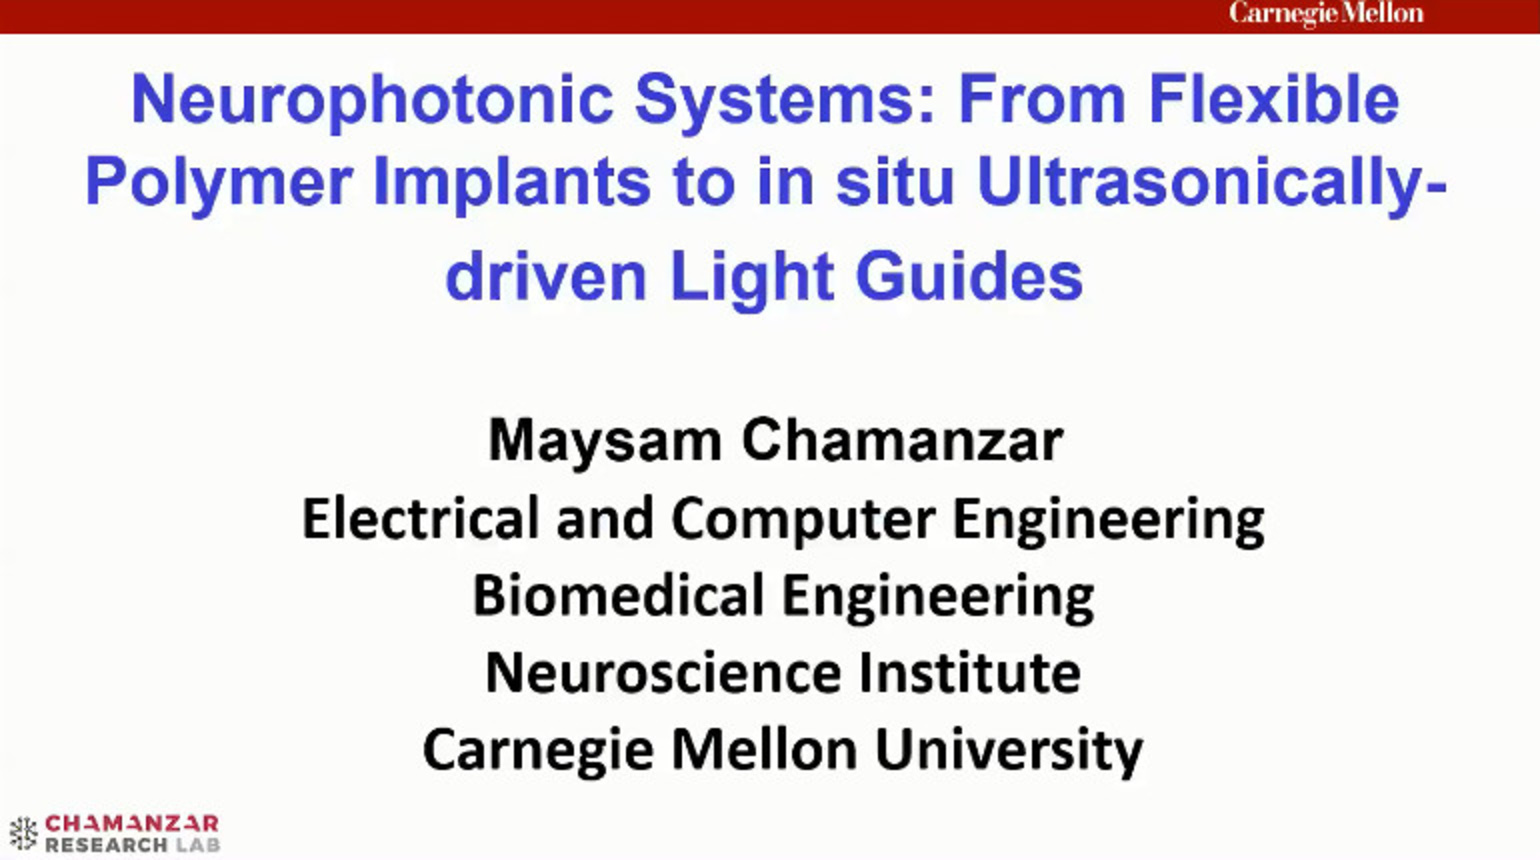 IEEE Brain: Neurophotonic Systems: From Flexible Polymer Implants to in situ Ultrasonically-driven Light Guides